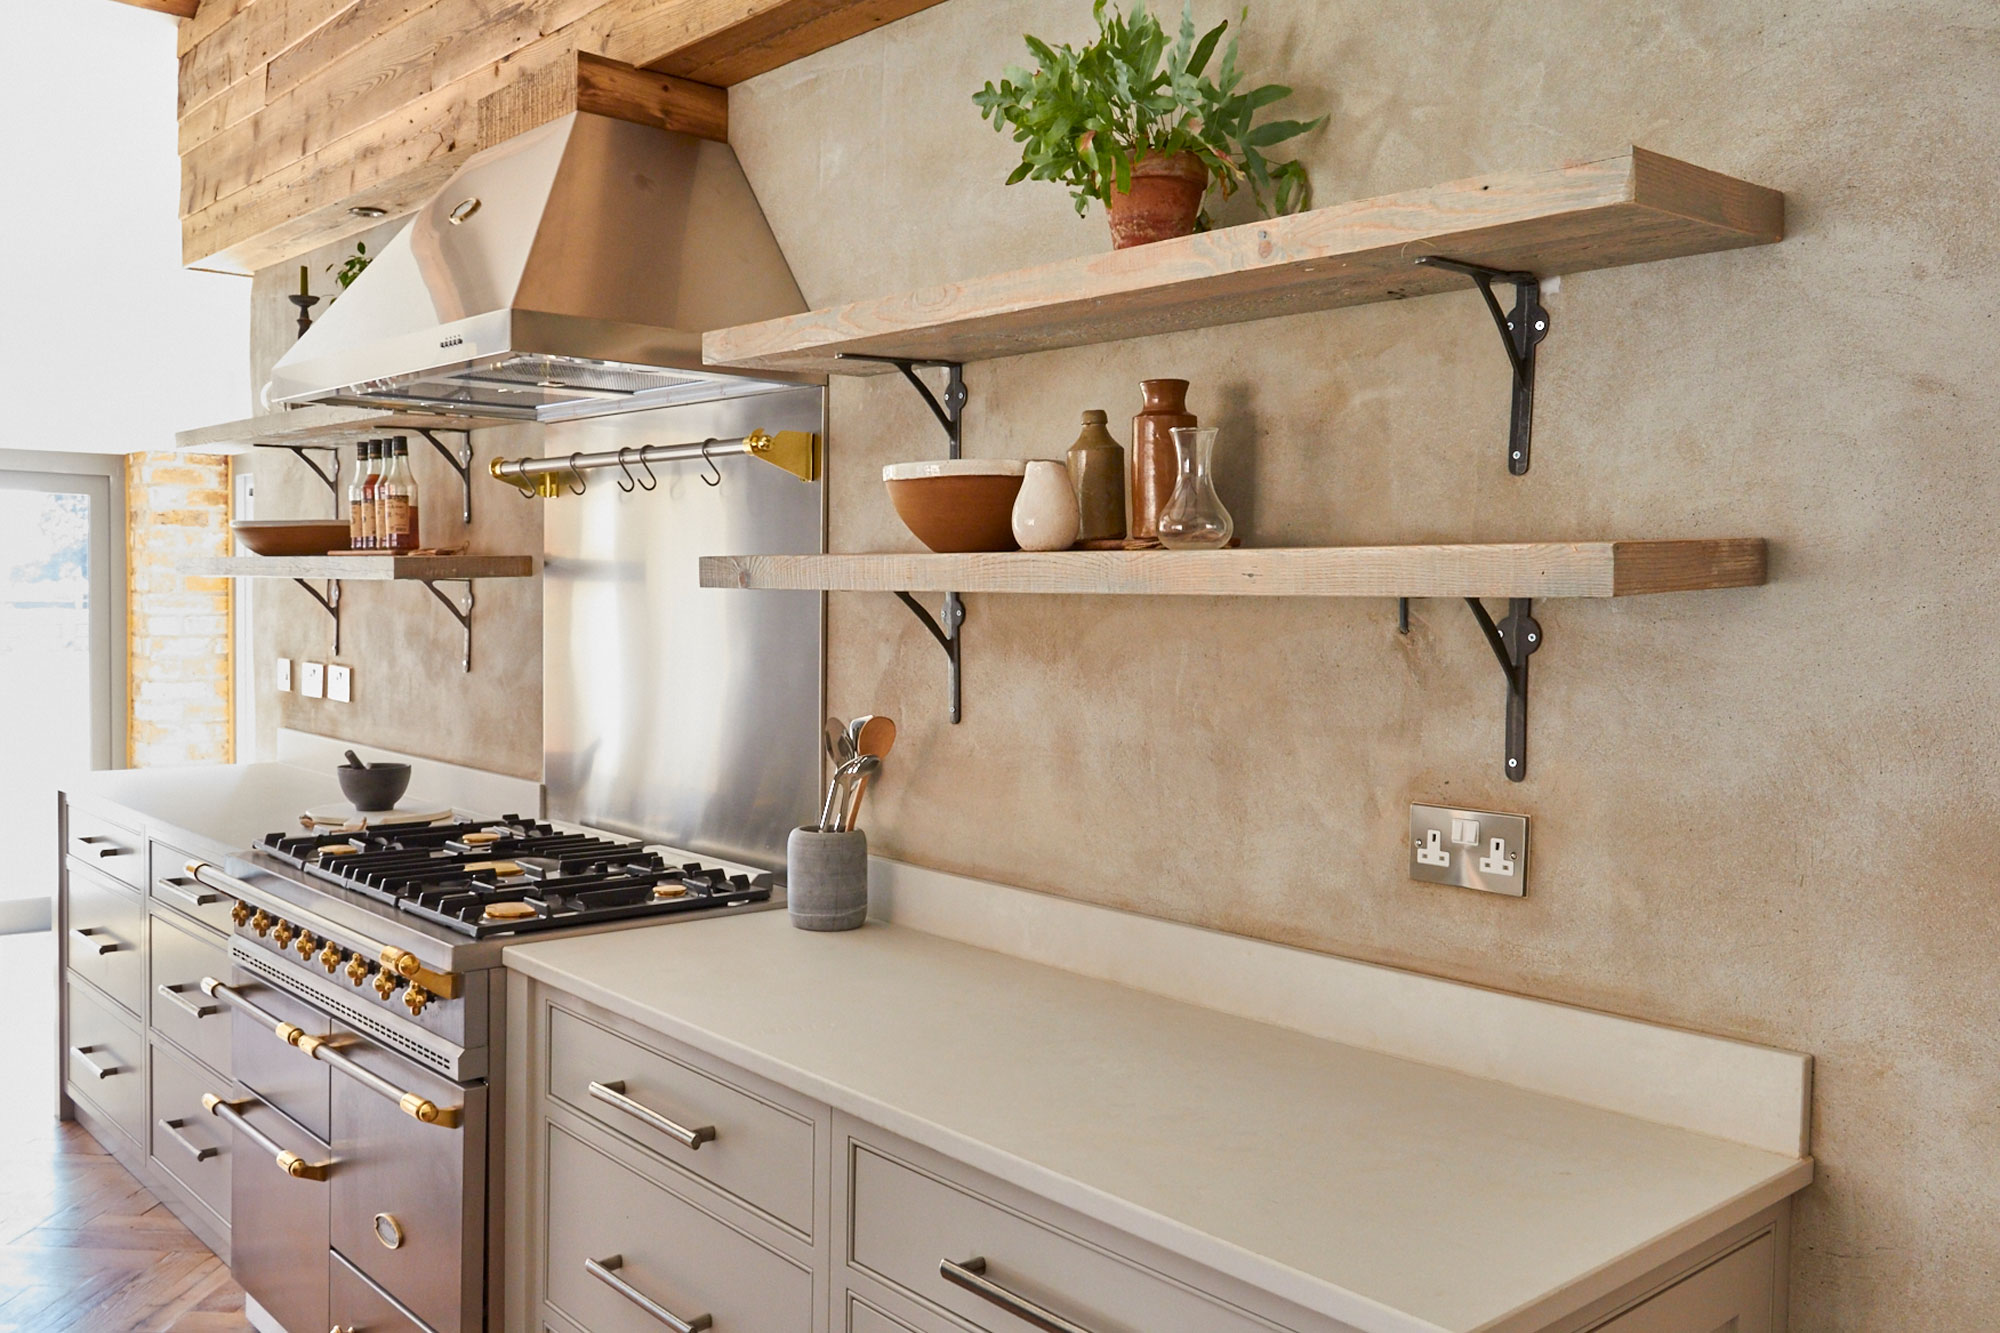 Rustic open shelves above Caesarstone white worktop and bespoke kitchen pan drawers